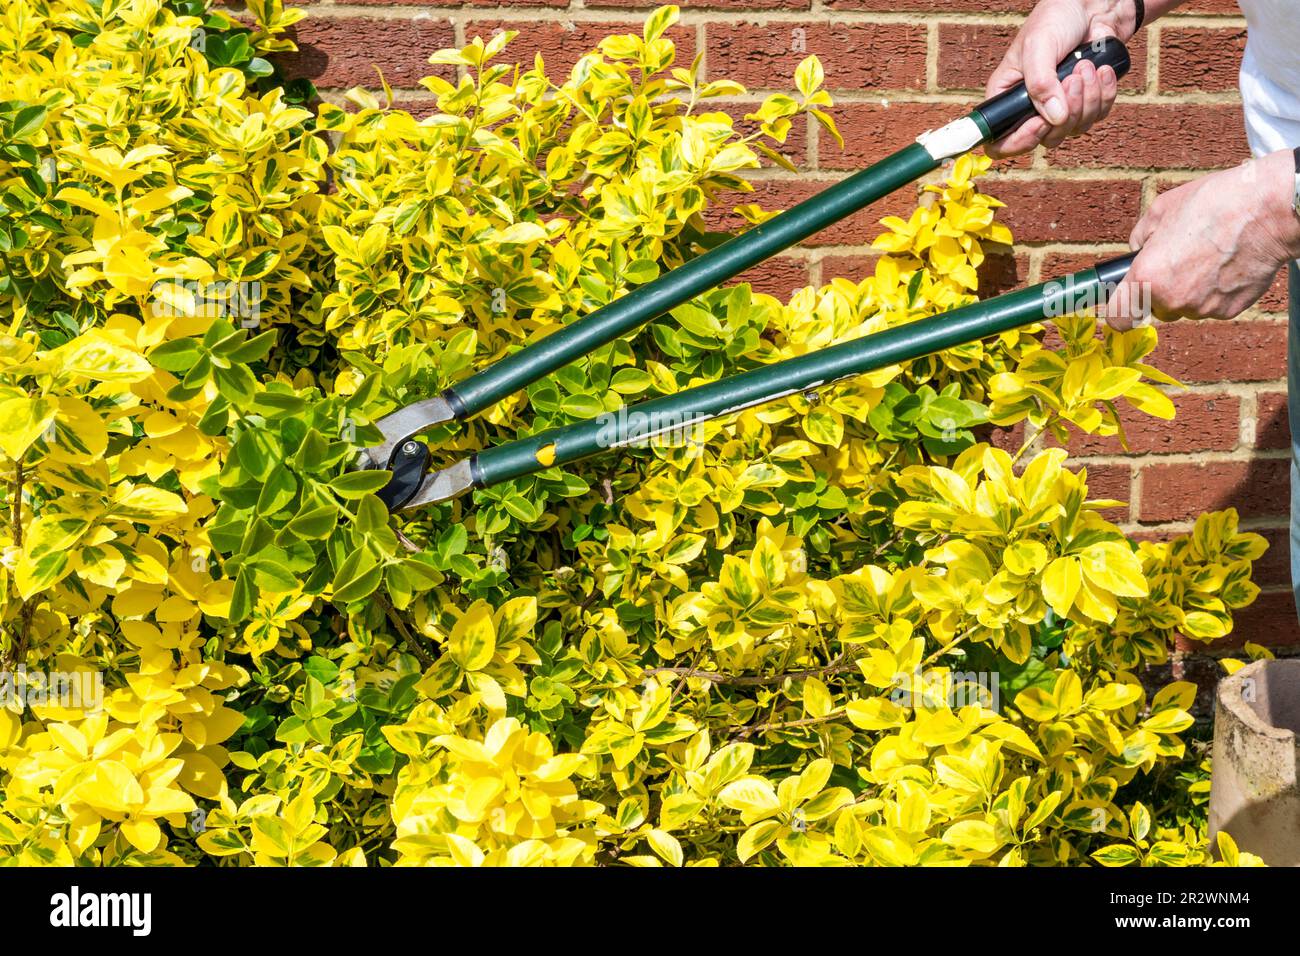 Pruning green branch from a Euonymus shrub, to prevent it reverting back to green away from its yellow colour. Stock Photo